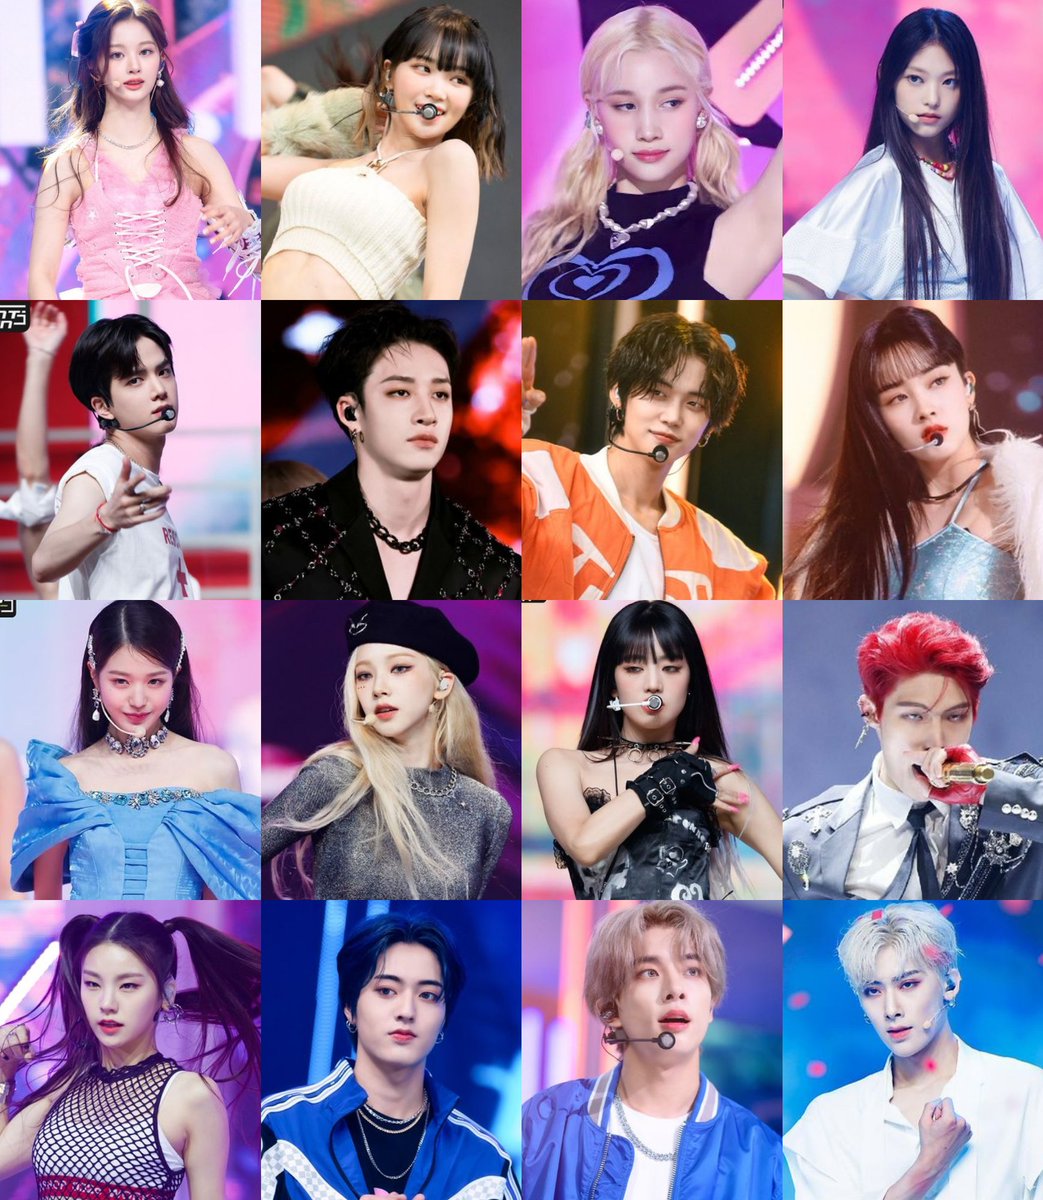 Who are the best 4th generation kpop idols?